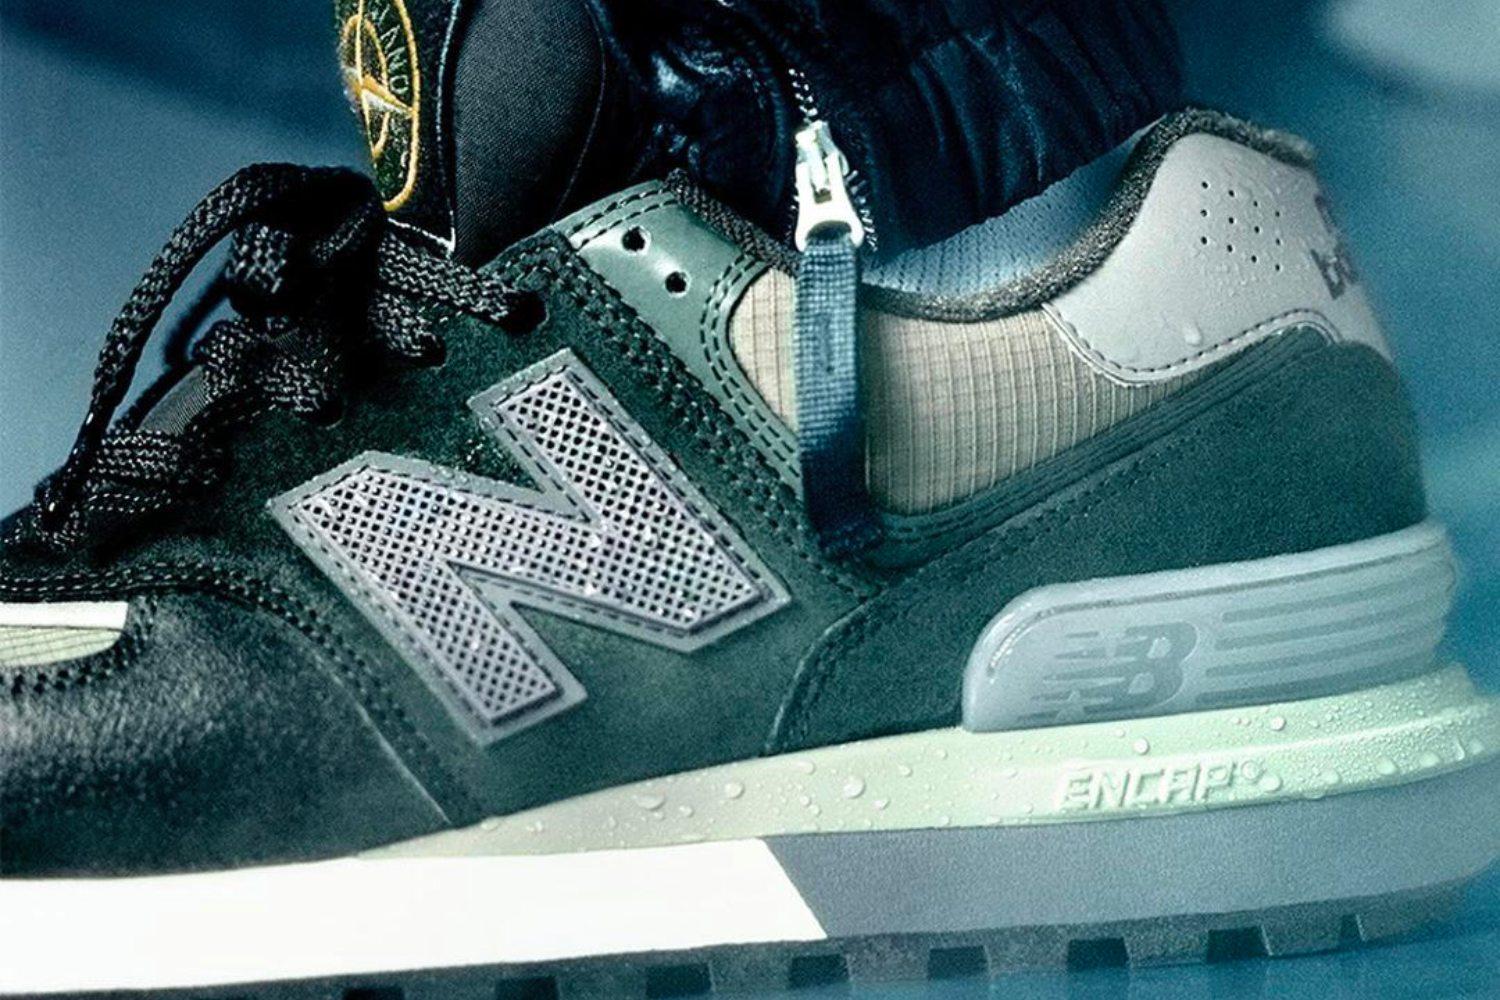 Stone Island releases two new colorways for the New Balance 574